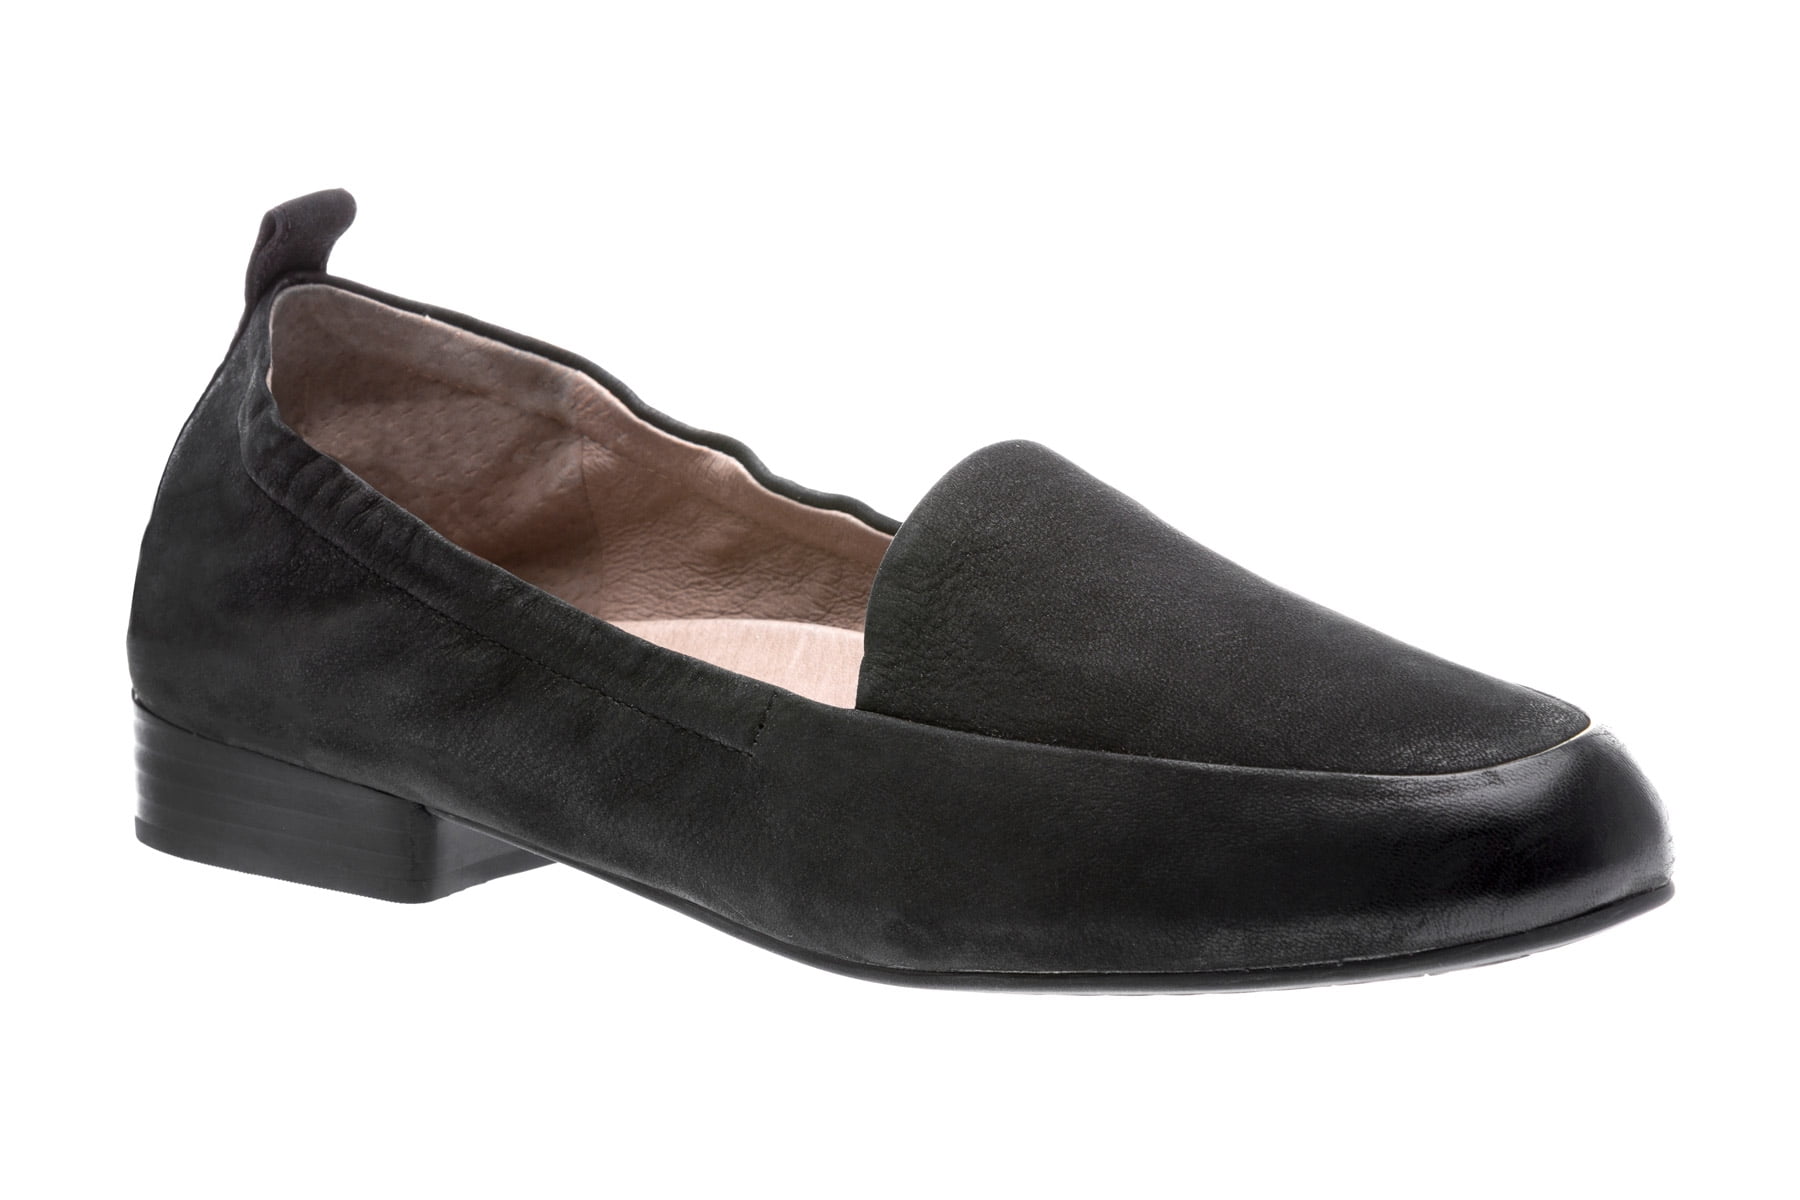 dress shoes with metatarsal support